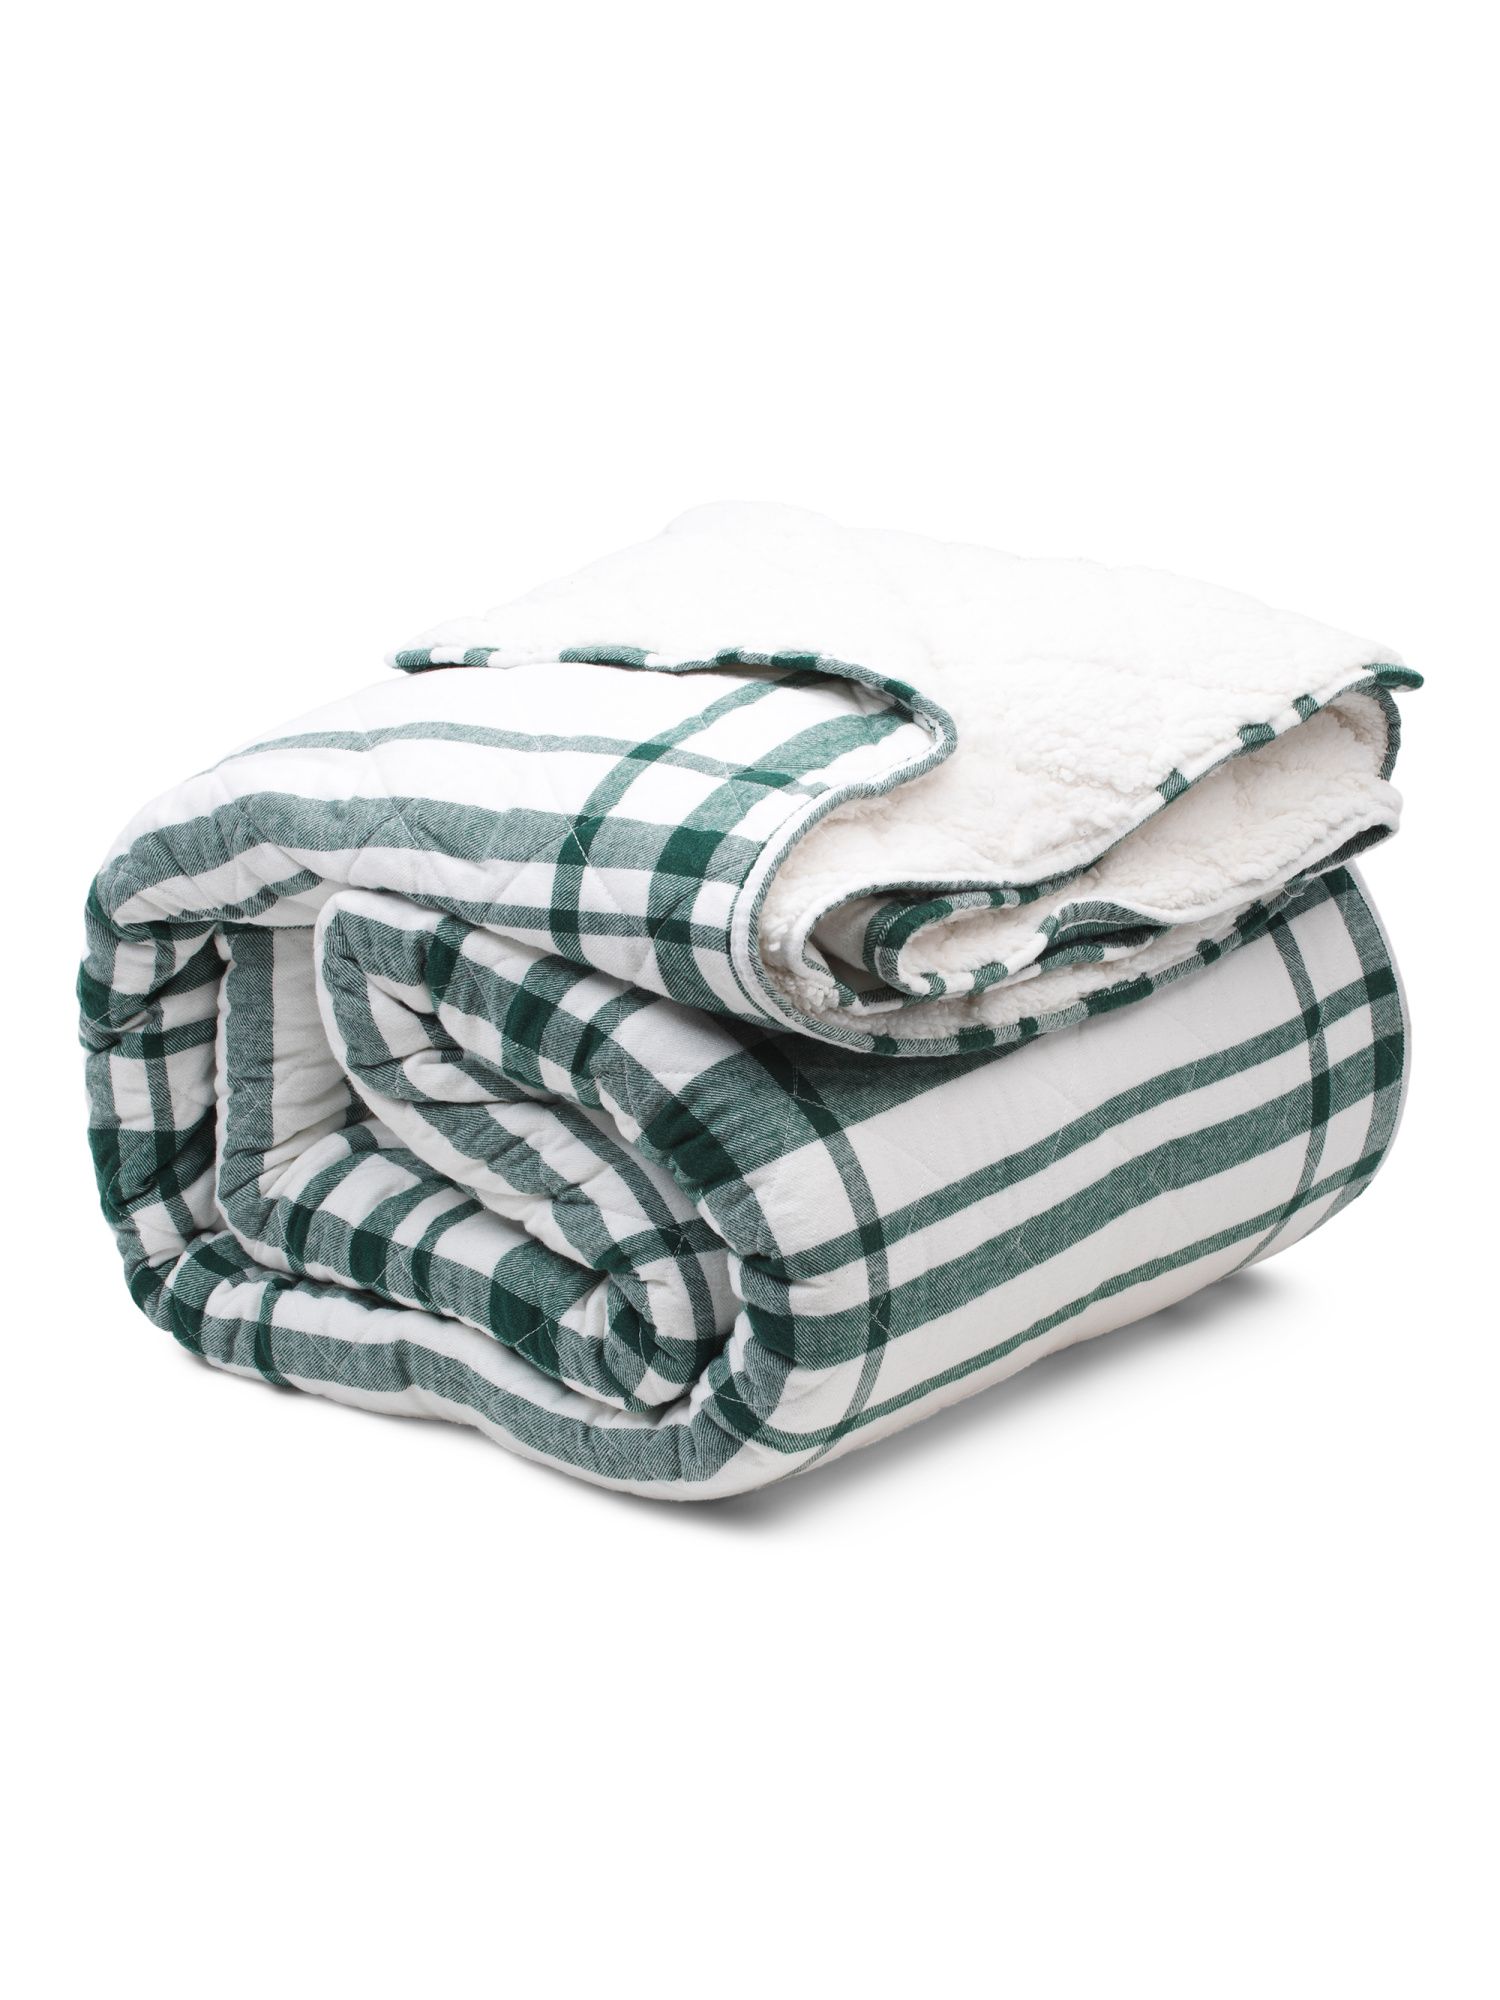 Glasgow Sherpa Reverse Woven Flannel Quilt Set | Gifts For Him | Marshalls | Marshalls